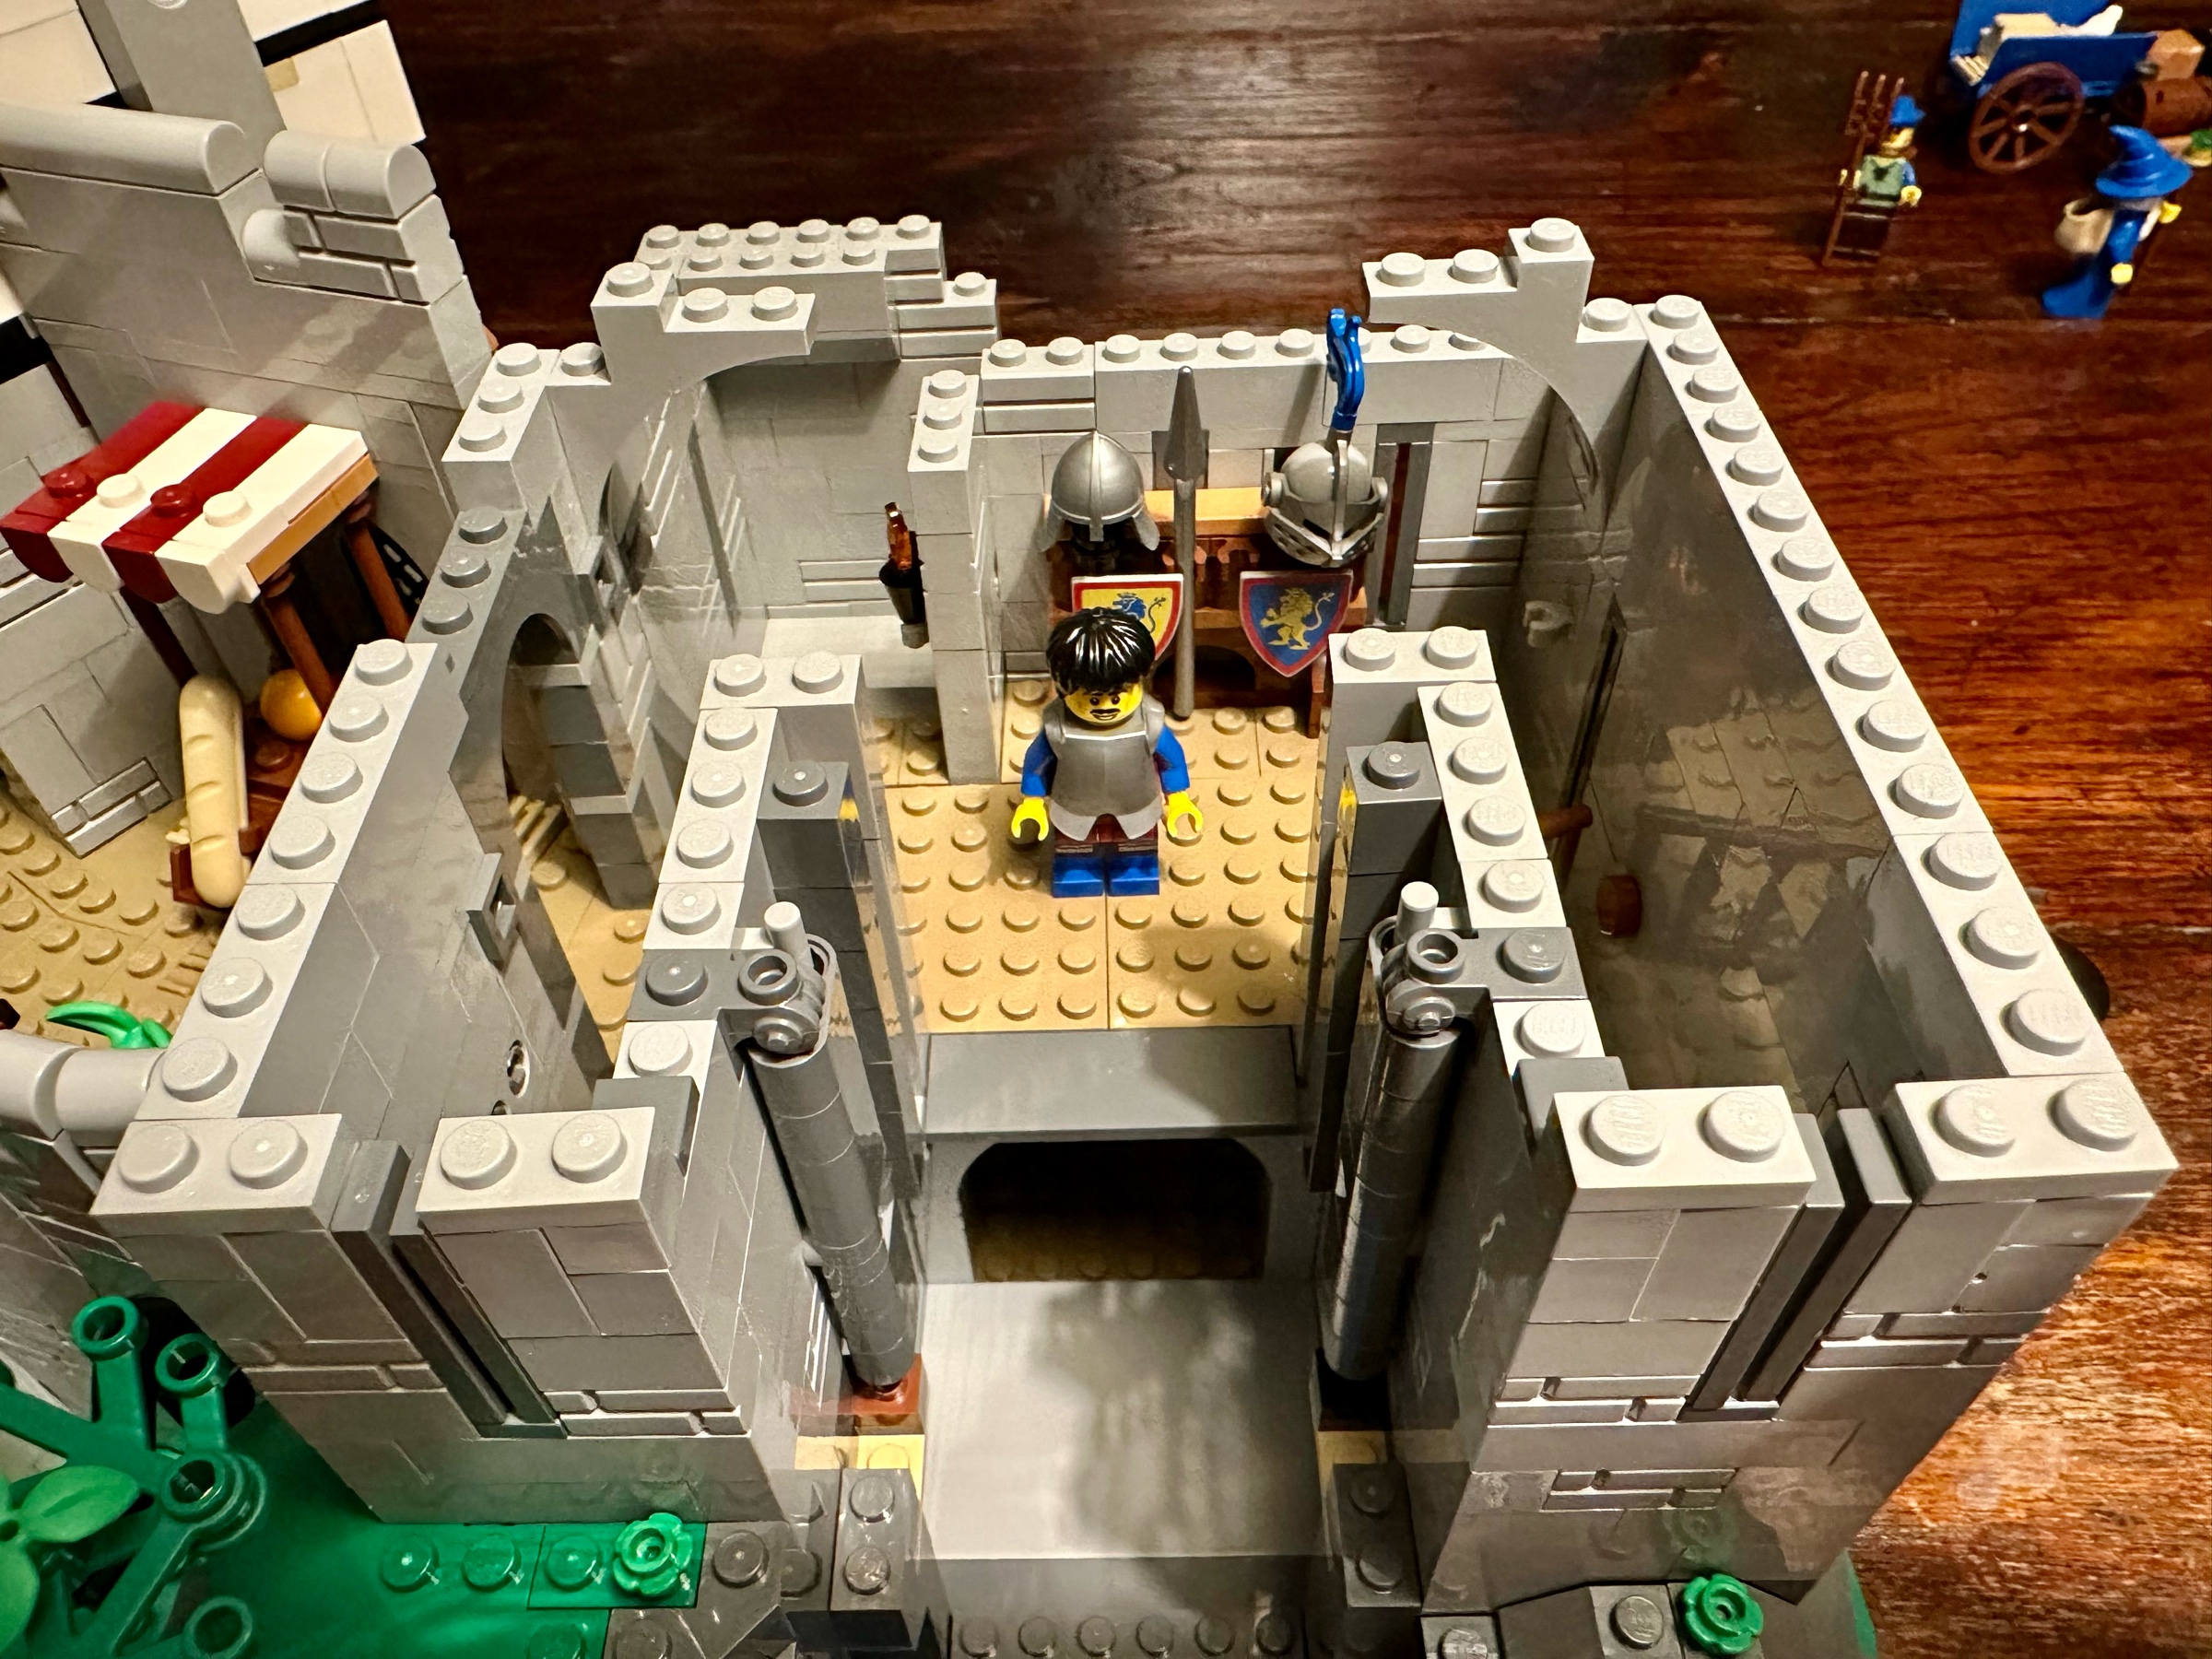 LEGO castle armory with an armored knight and a stand holding two shields, two helmets, and a spear.